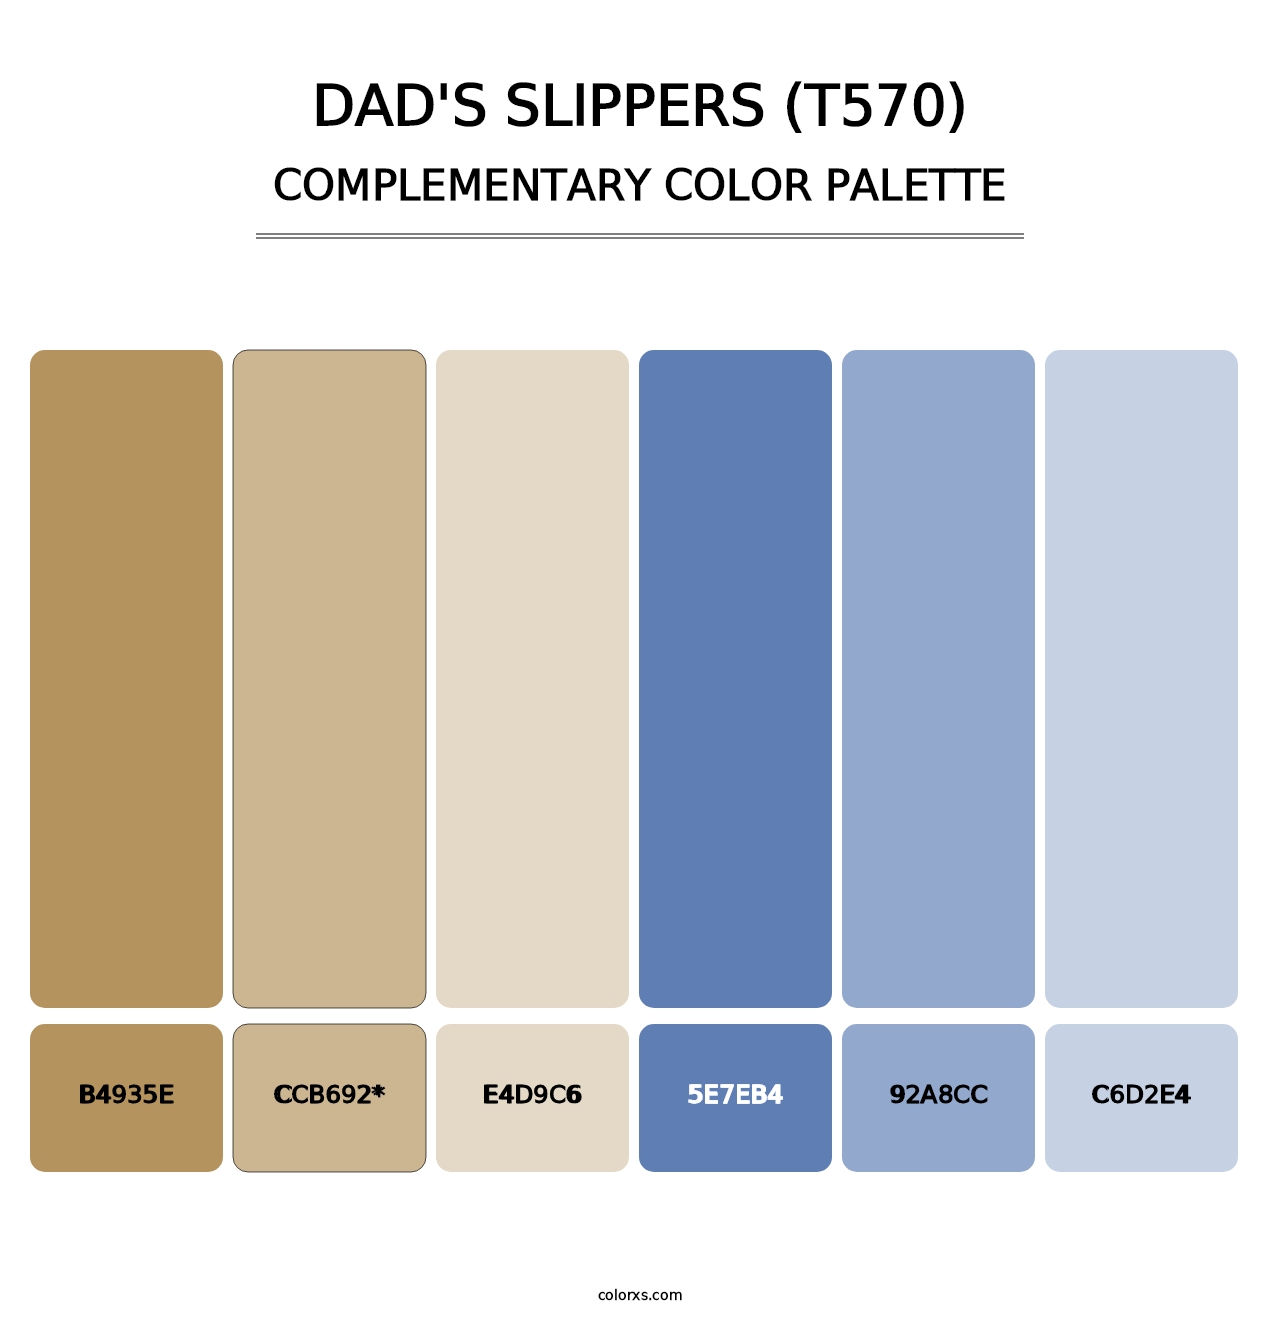 Dad's Slippers (T570) - Complementary Color Palette